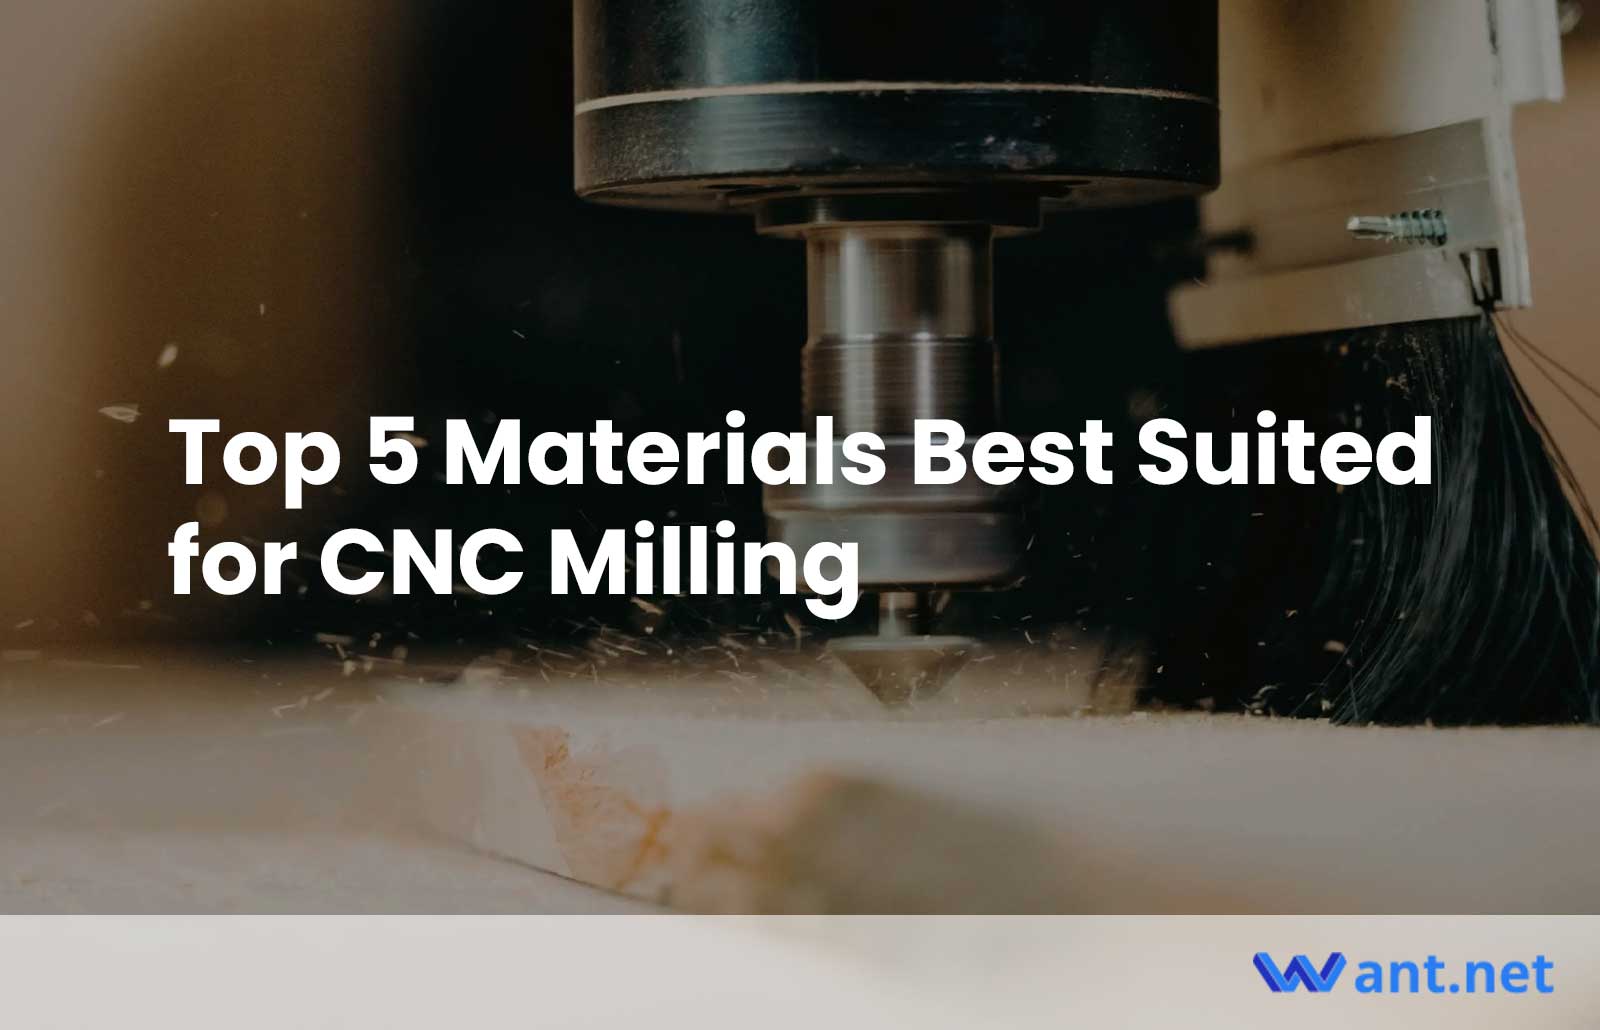 Top 5 Materials Best Suited for CNC Milling